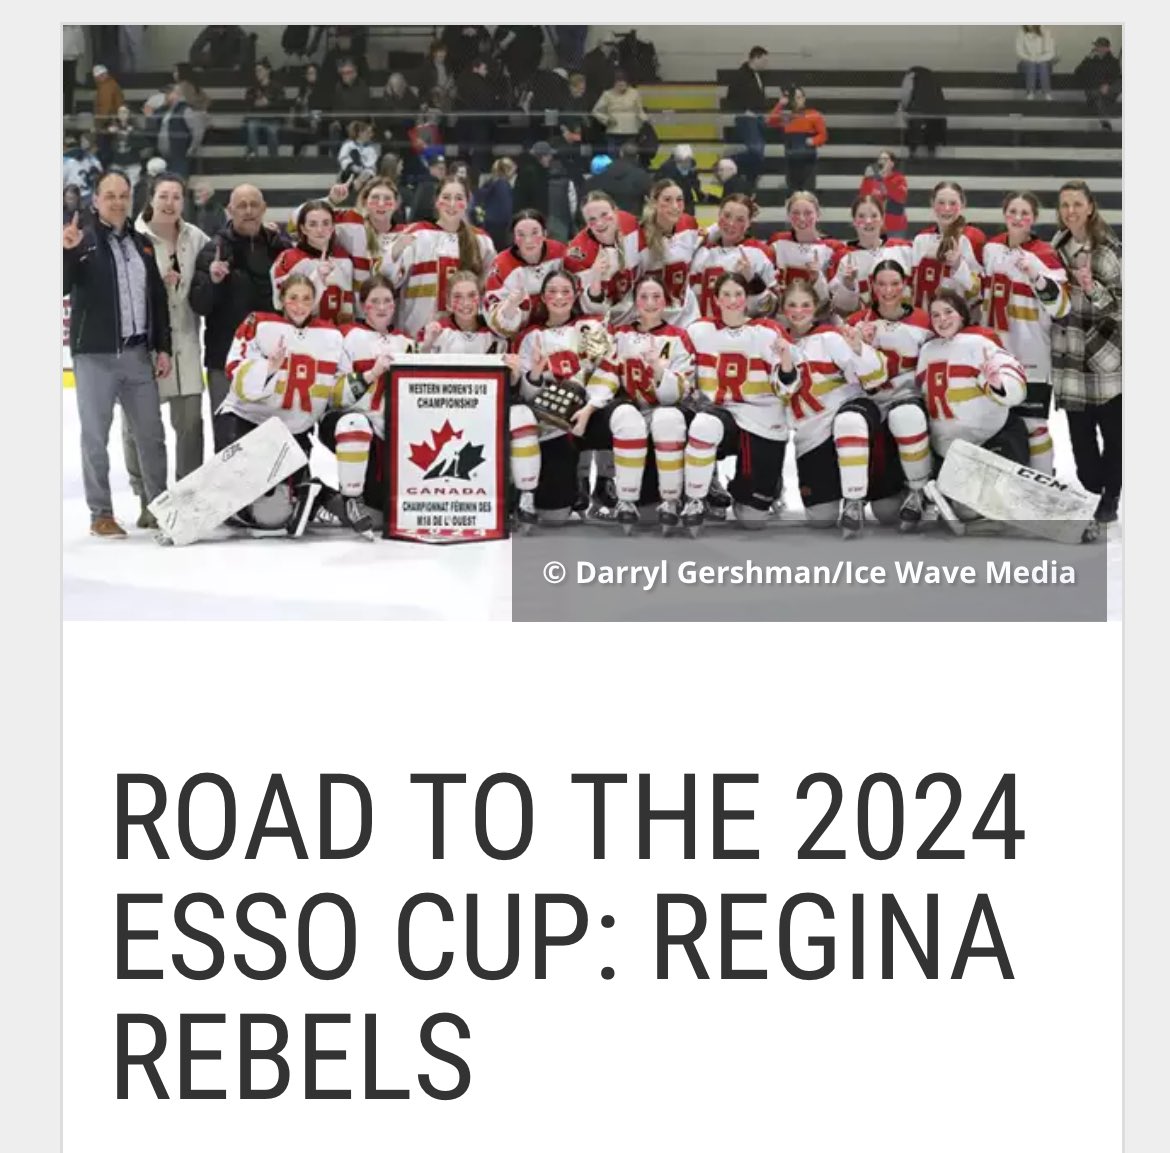 The U18 Regina Rebels are off to compete in the ESSO Cup!   Coming off a bronze medal last year and  a 26-3 regular season record this year, I have no doubt they will be top contenders for gold.   Good Luck! hockeycanada.ca/news/regina-re…